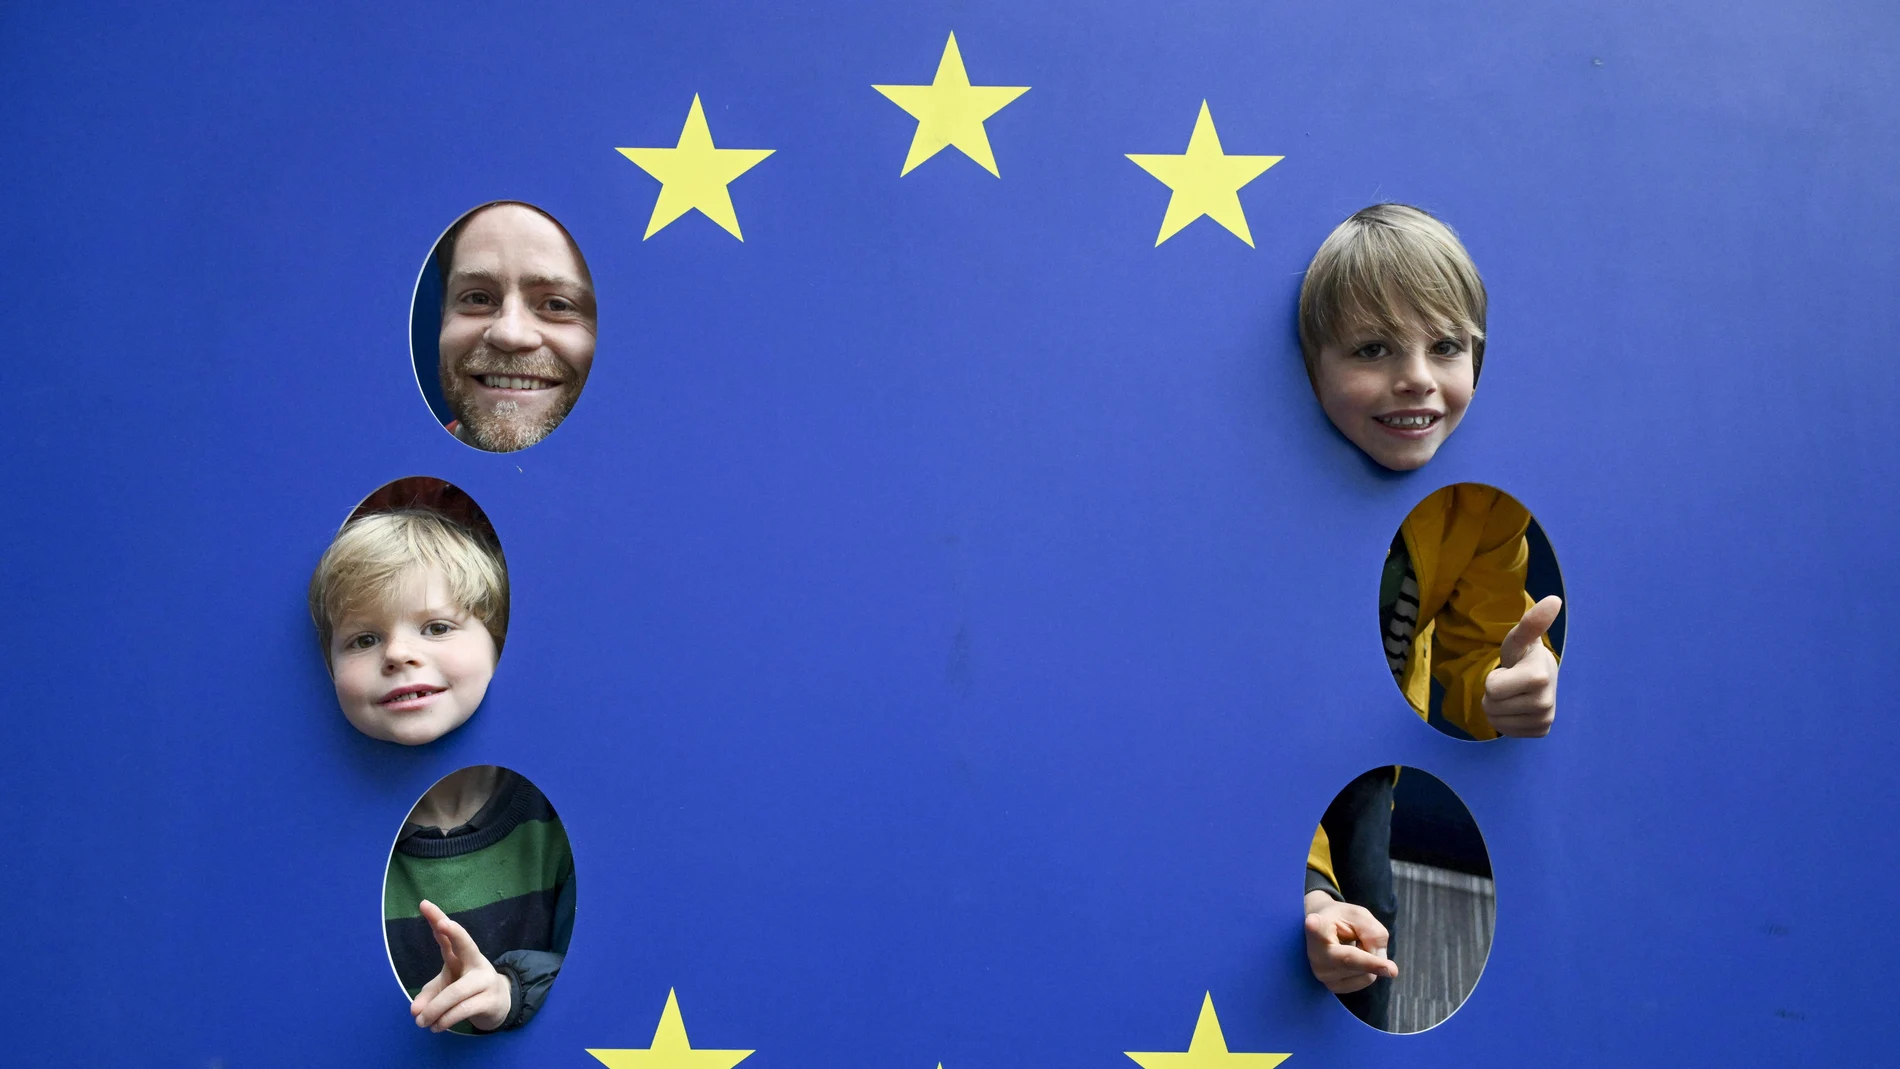 Visitors pose for a picture with EU flag during the open days of European institutions on 'Europe Day' in Brussels, Belgium.